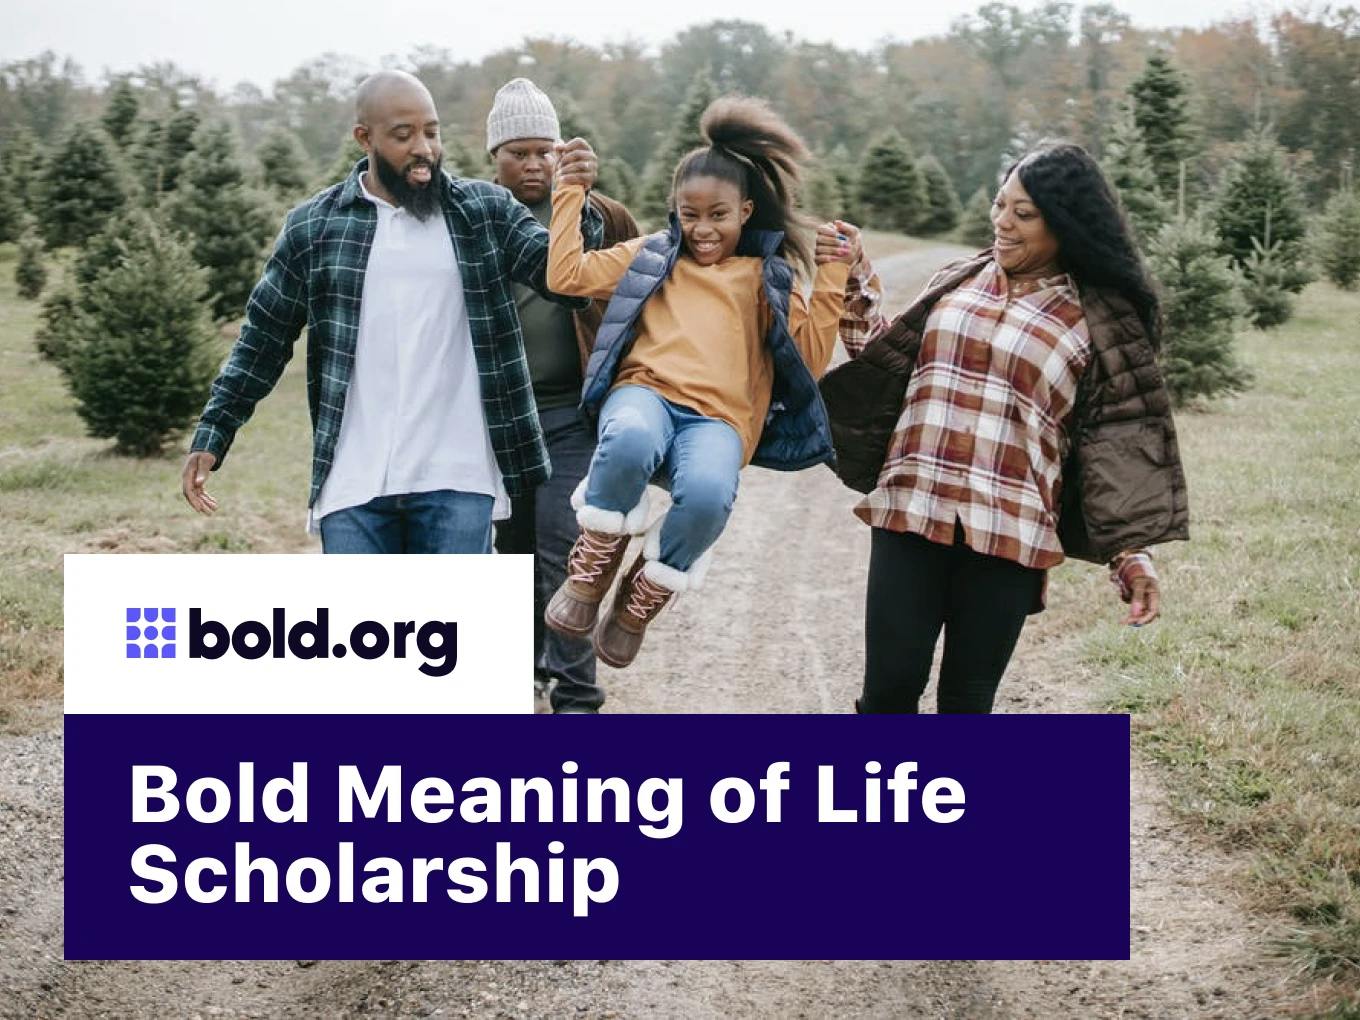 Bold Meaning of Life Scholarship